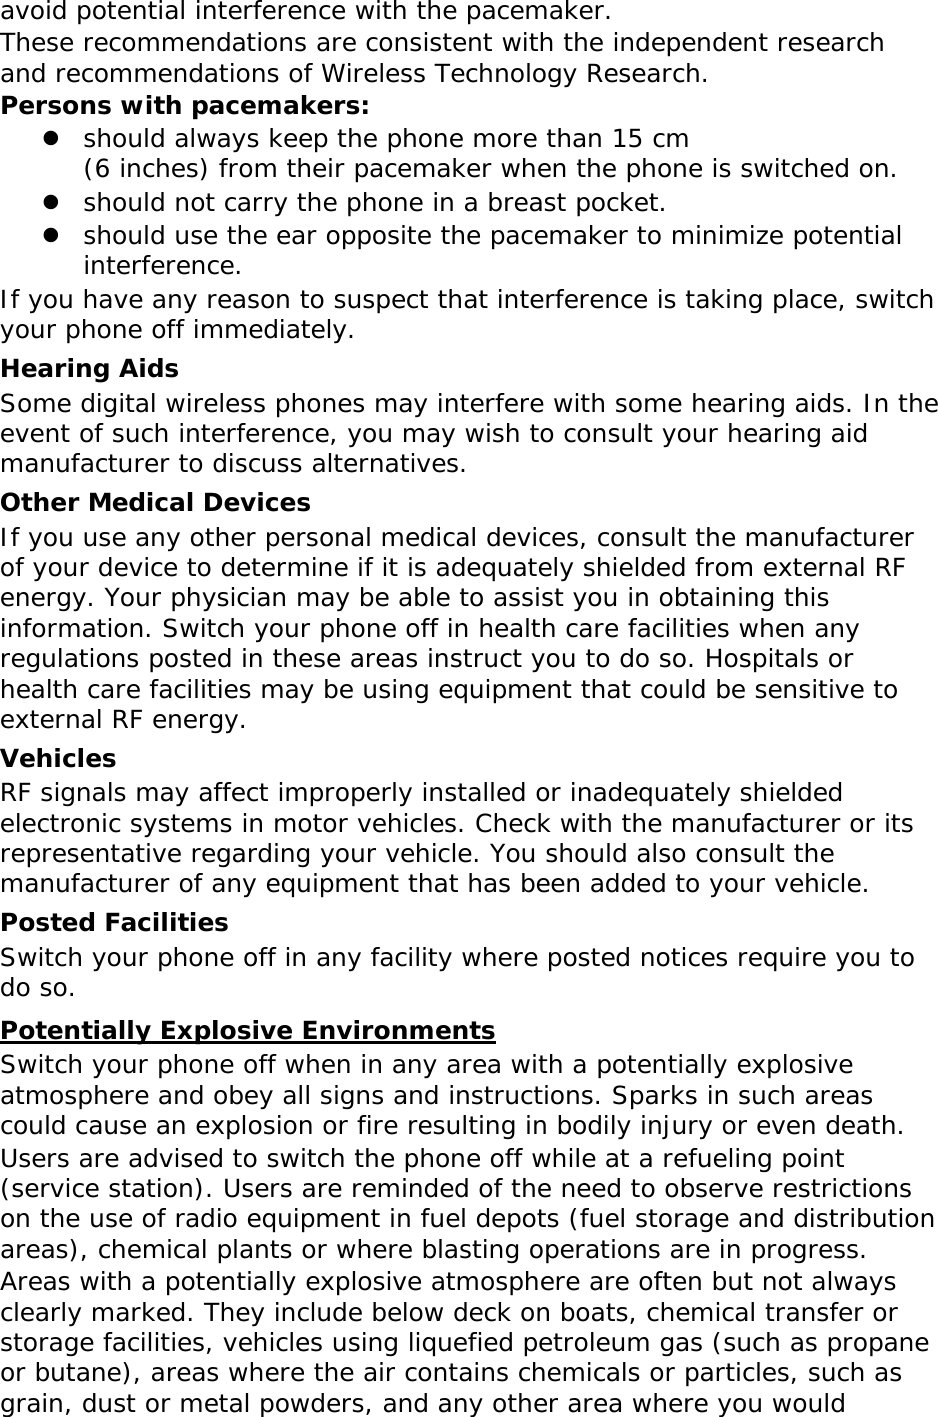 avoid potential interference with the pacemaker. These recommendations are consistent with the independent research and recommendations of Wireless Technology Research. Persons with pacemakers:  should always keep the phone more than 15 cm  (6 inches) from their pacemaker when the phone is switched on.  should not carry the phone in a breast pocket.  should use the ear opposite the pacemaker to minimize potential interference. If you have any reason to suspect that interference is taking place, switch your phone off immediately. Hearing Aids Some digital wireless phones may interfere with some hearing aids. In the event of such interference, you may wish to consult your hearing aid manufacturer to discuss alternatives. Other Medical Devices If you use any other personal medical devices, consult the manufacturer of your device to determine if it is adequately shielded from external RF energy. Your physician may be able to assist you in obtaining this information. Switch your phone off in health care facilities when any regulations posted in these areas instruct you to do so. Hospitals or health care facilities may be using equipment that could be sensitive to external RF energy. Vehicles RF signals may affect improperly installed or inadequately shielded electronic systems in motor vehicles. Check with the manufacturer or its representative regarding your vehicle. You should also consult the manufacturer of any equipment that has been added to your vehicle. Posted Facilities Switch your phone off in any facility where posted notices require you to do so. Potentially Explosive Environments Switch your phone off when in any area with a potentially explosive atmosphere and obey all signs and instructions. Sparks in such areas could cause an explosion or fire resulting in bodily injury or even death. Users are advised to switch the phone off while at a refueling point (service station). Users are reminded of the need to observe restrictions on the use of radio equipment in fuel depots (fuel storage and distribution areas), chemical plants or where blasting operations are in progress. Areas with a potentially explosive atmosphere are often but not always clearly marked. They include below deck on boats, chemical transfer or storage facilities, vehicles using liquefied petroleum gas (such as propane or butane), areas where the air contains chemicals or particles, such as grain, dust or metal powders, and any other area where you would 